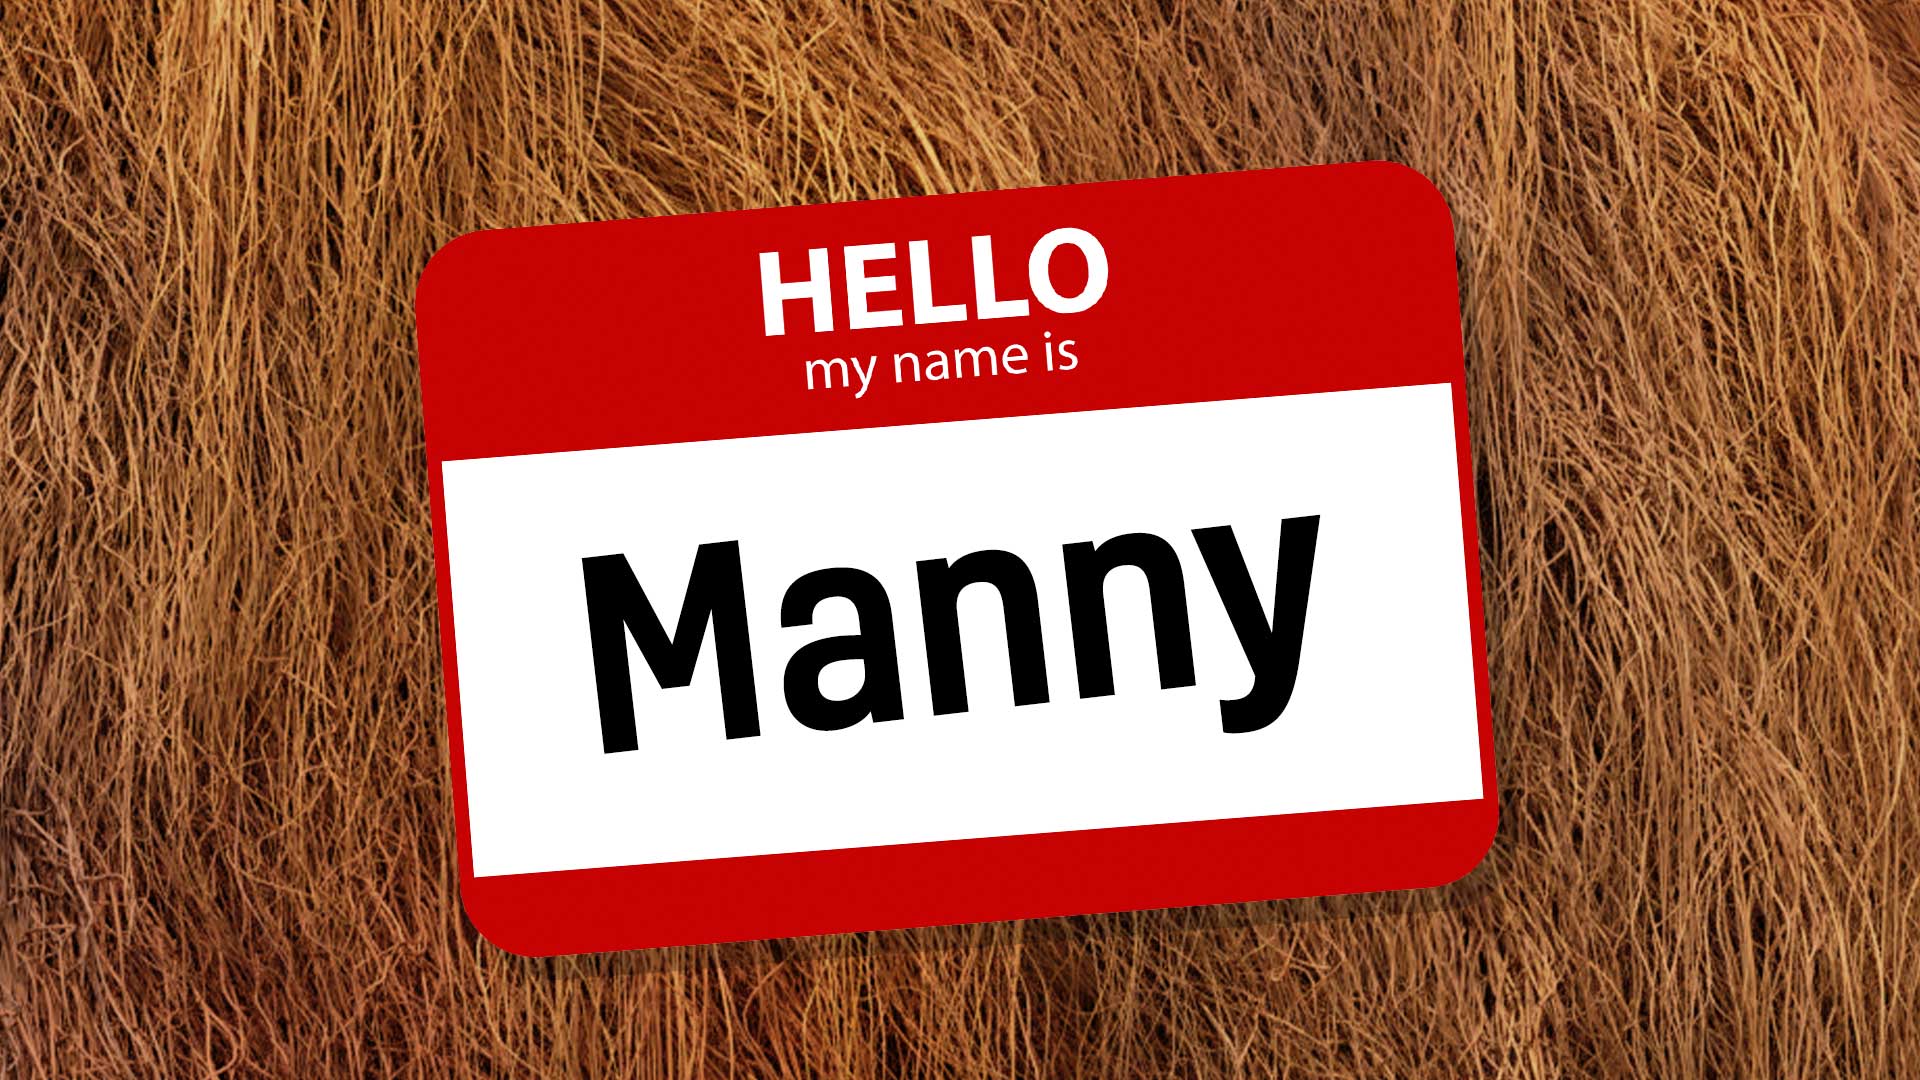 A name badge with Manny written on it